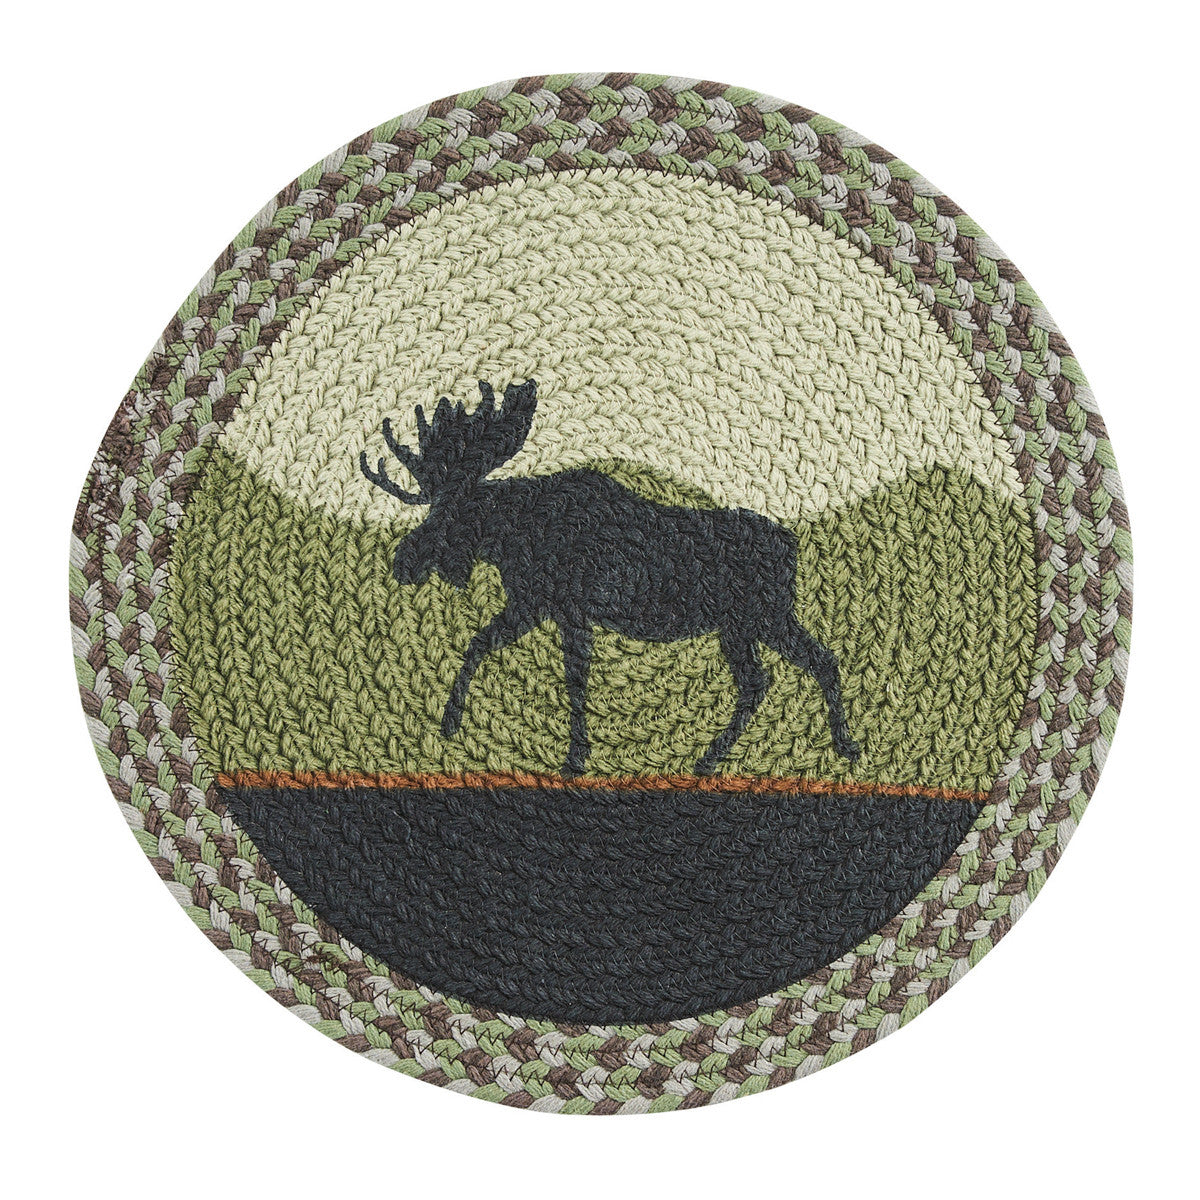 Moose Braided Placemat Set of 12 - Park Designs